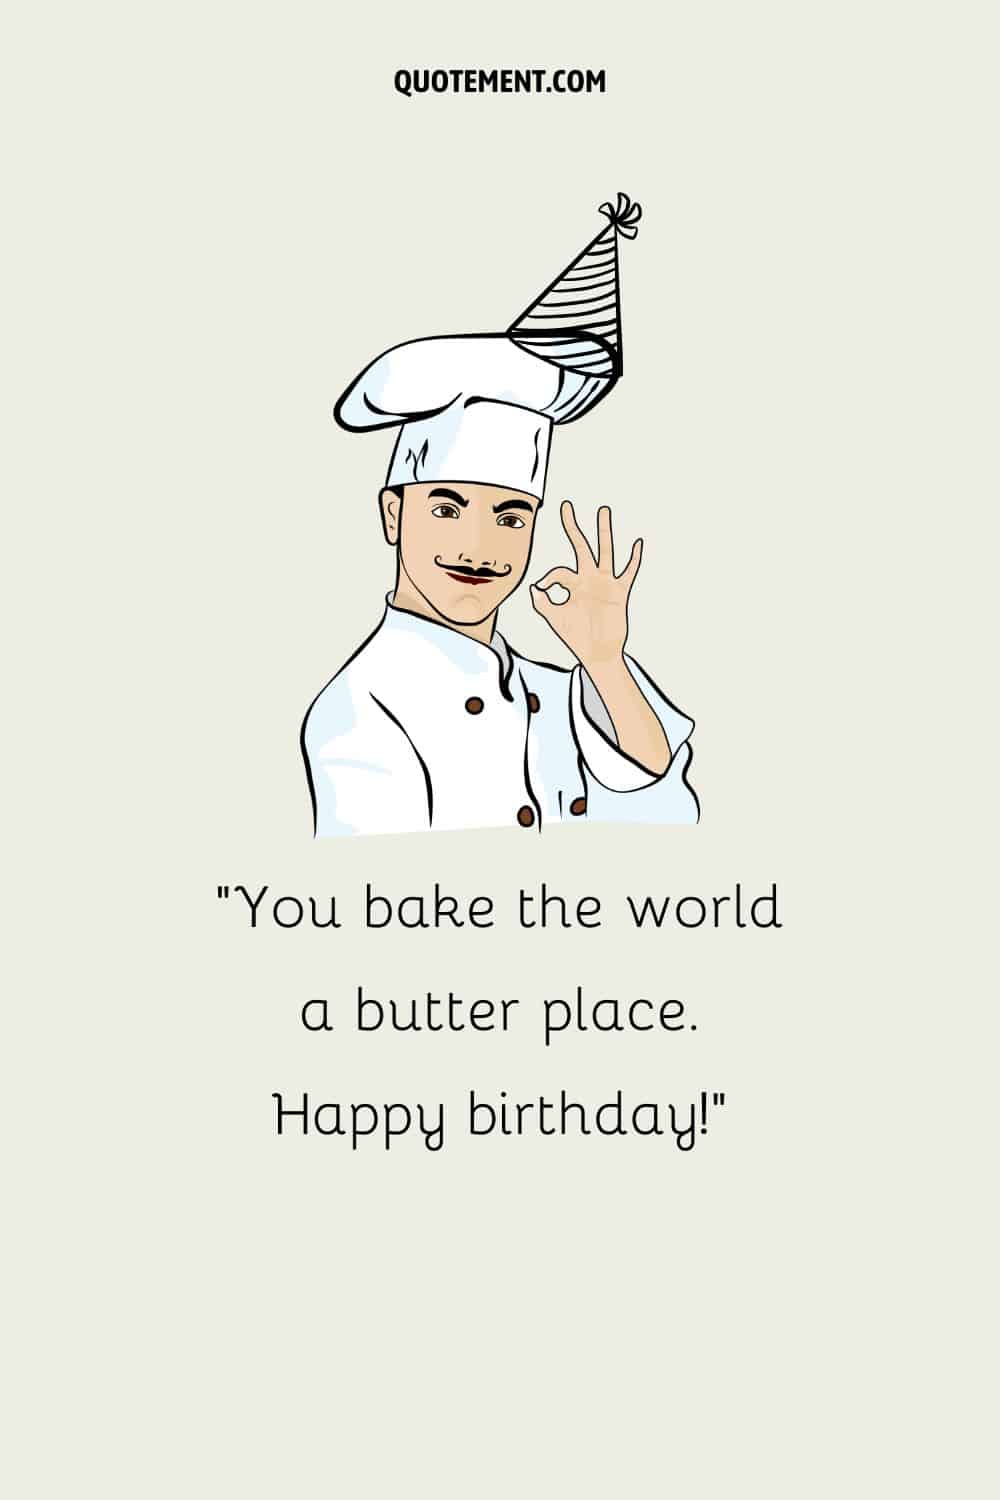 Cute illustration of a male chef representing a birthday wish for a chef.